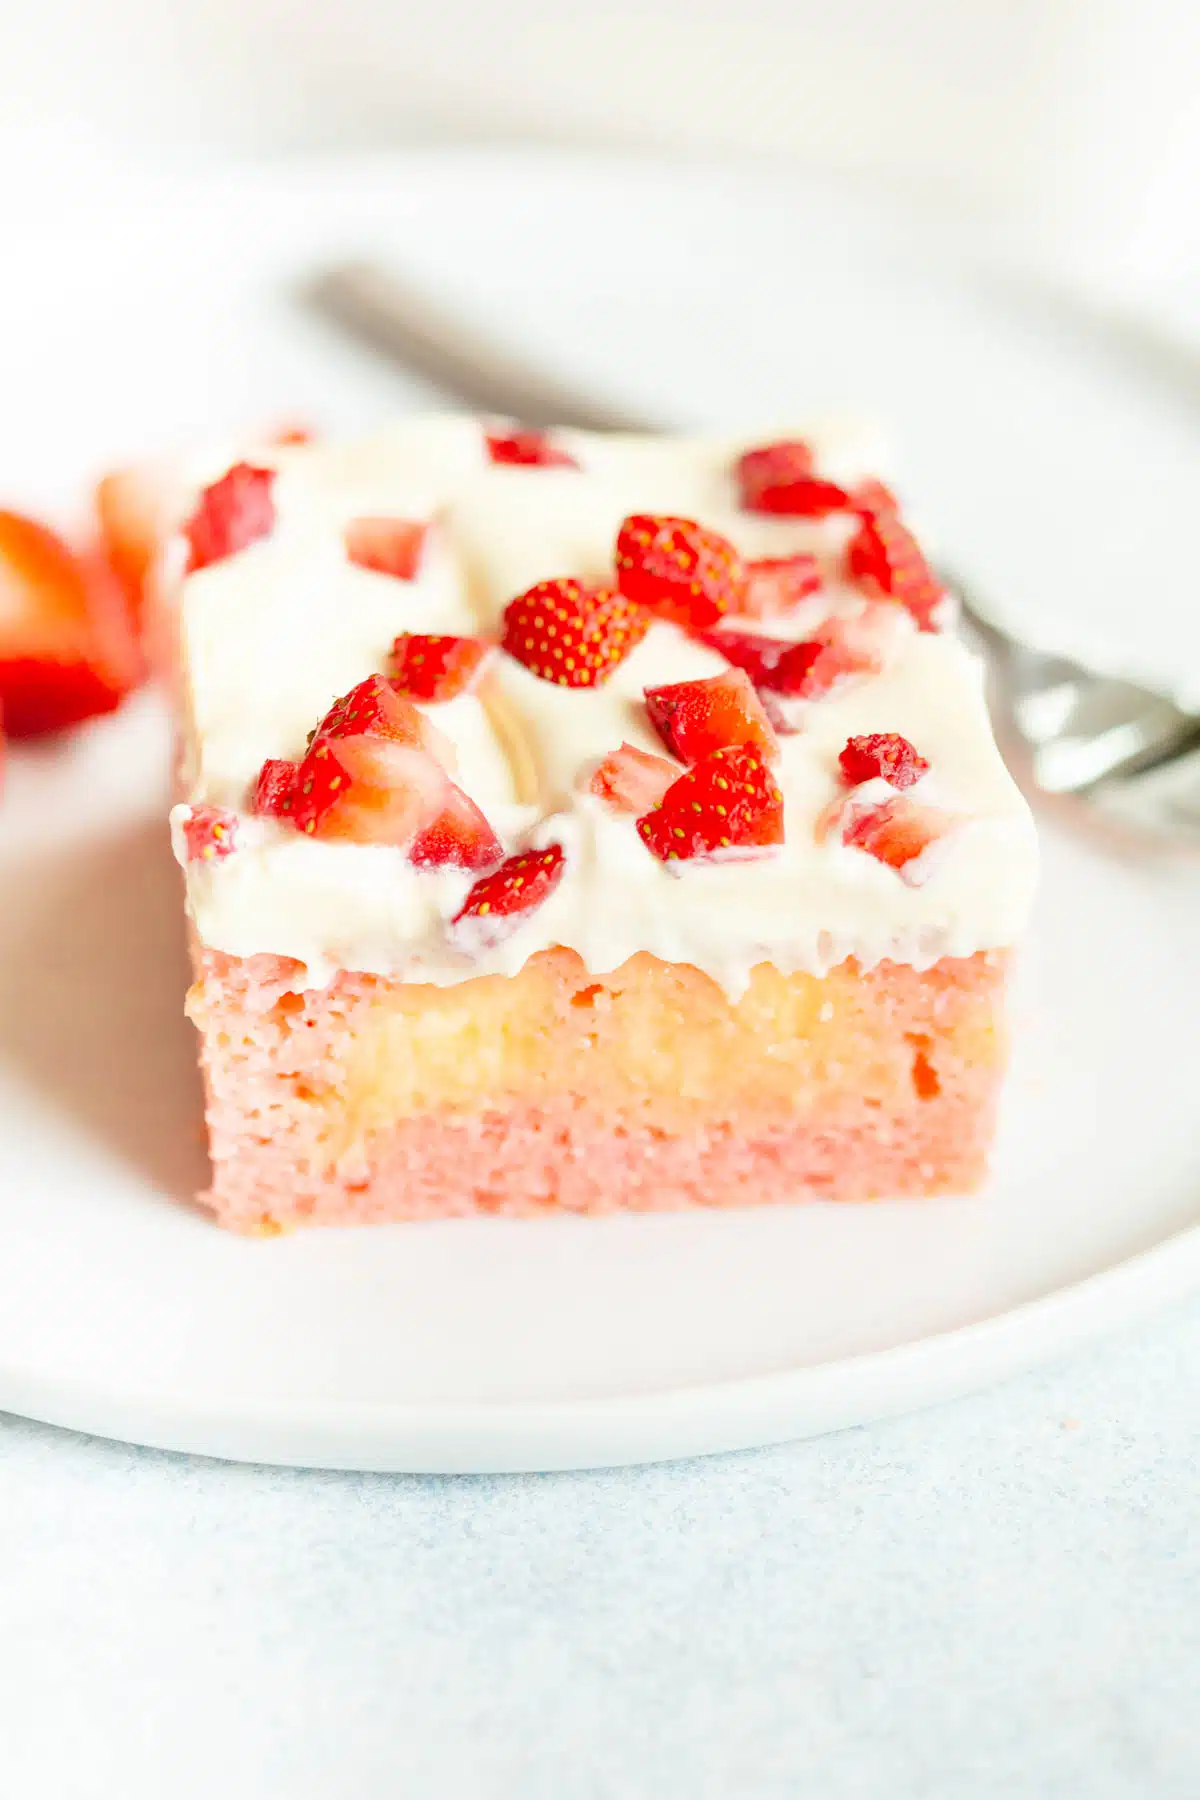 A slice of Strawberry Pudding Poke Cake on a white plate, topped with chopped strawberries. There is a silver fork in the background.